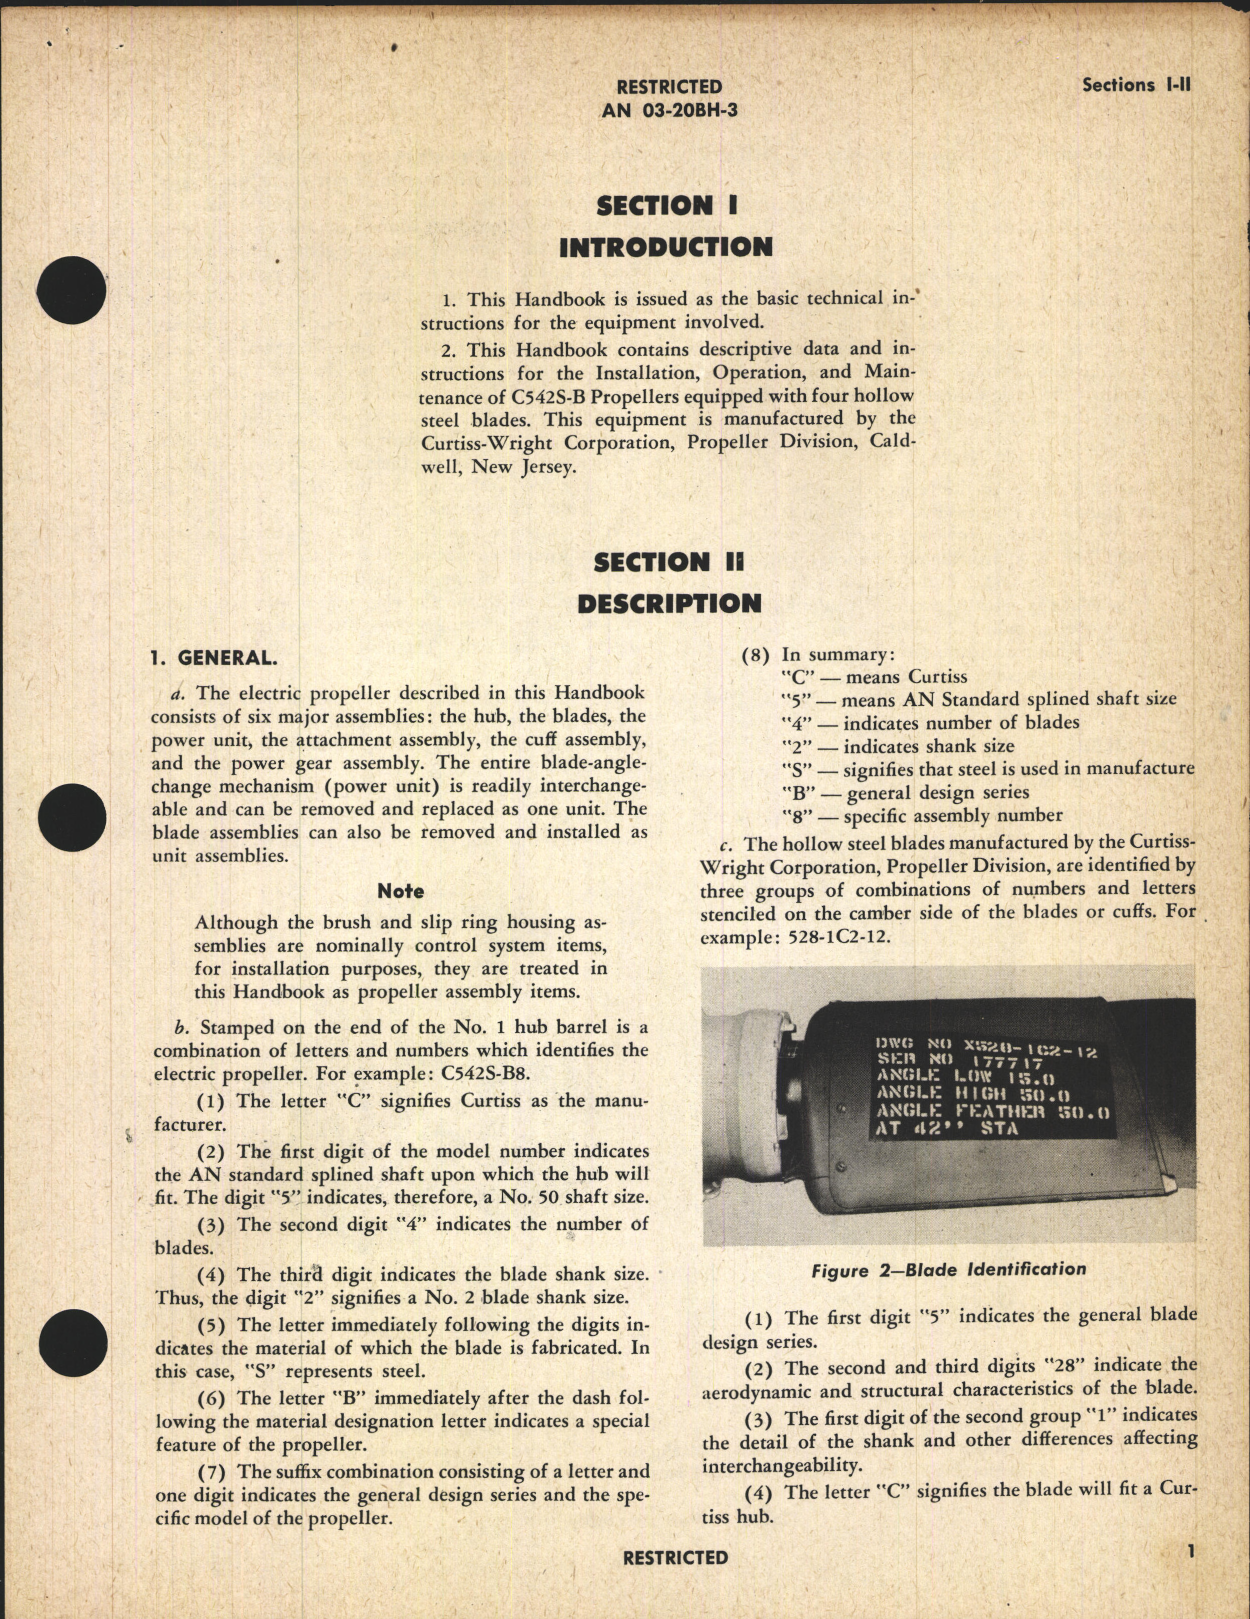 Sample page 5 from AirCorps Library document: Operation, Service, & Overhaul Instructions with Parts Catalog for Electric Propeller Model C542S-B